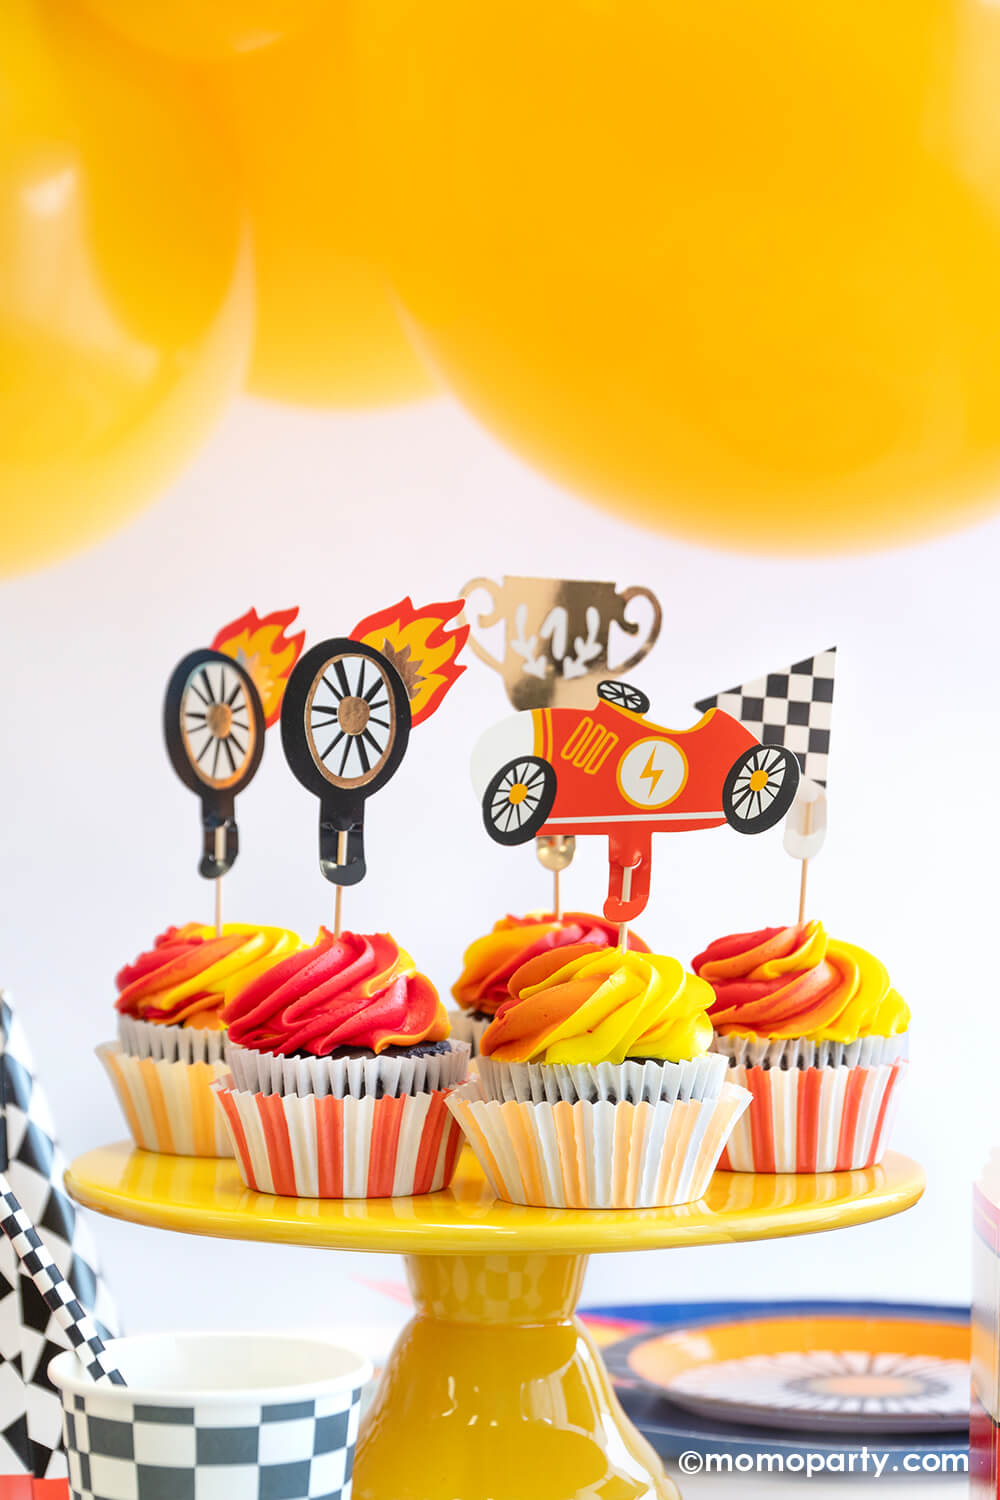 A race car / Hot Wheels themed party featuring orange and yellow swirl cupcakes topped with race car themed toppers including wheels, a vintage race car, a trophy and a checkered flag. In the back there are some yellow party balloons. On the table there are some race car themed tableware including checkered party cups, wheel shaped plates, midnight dinner plates.